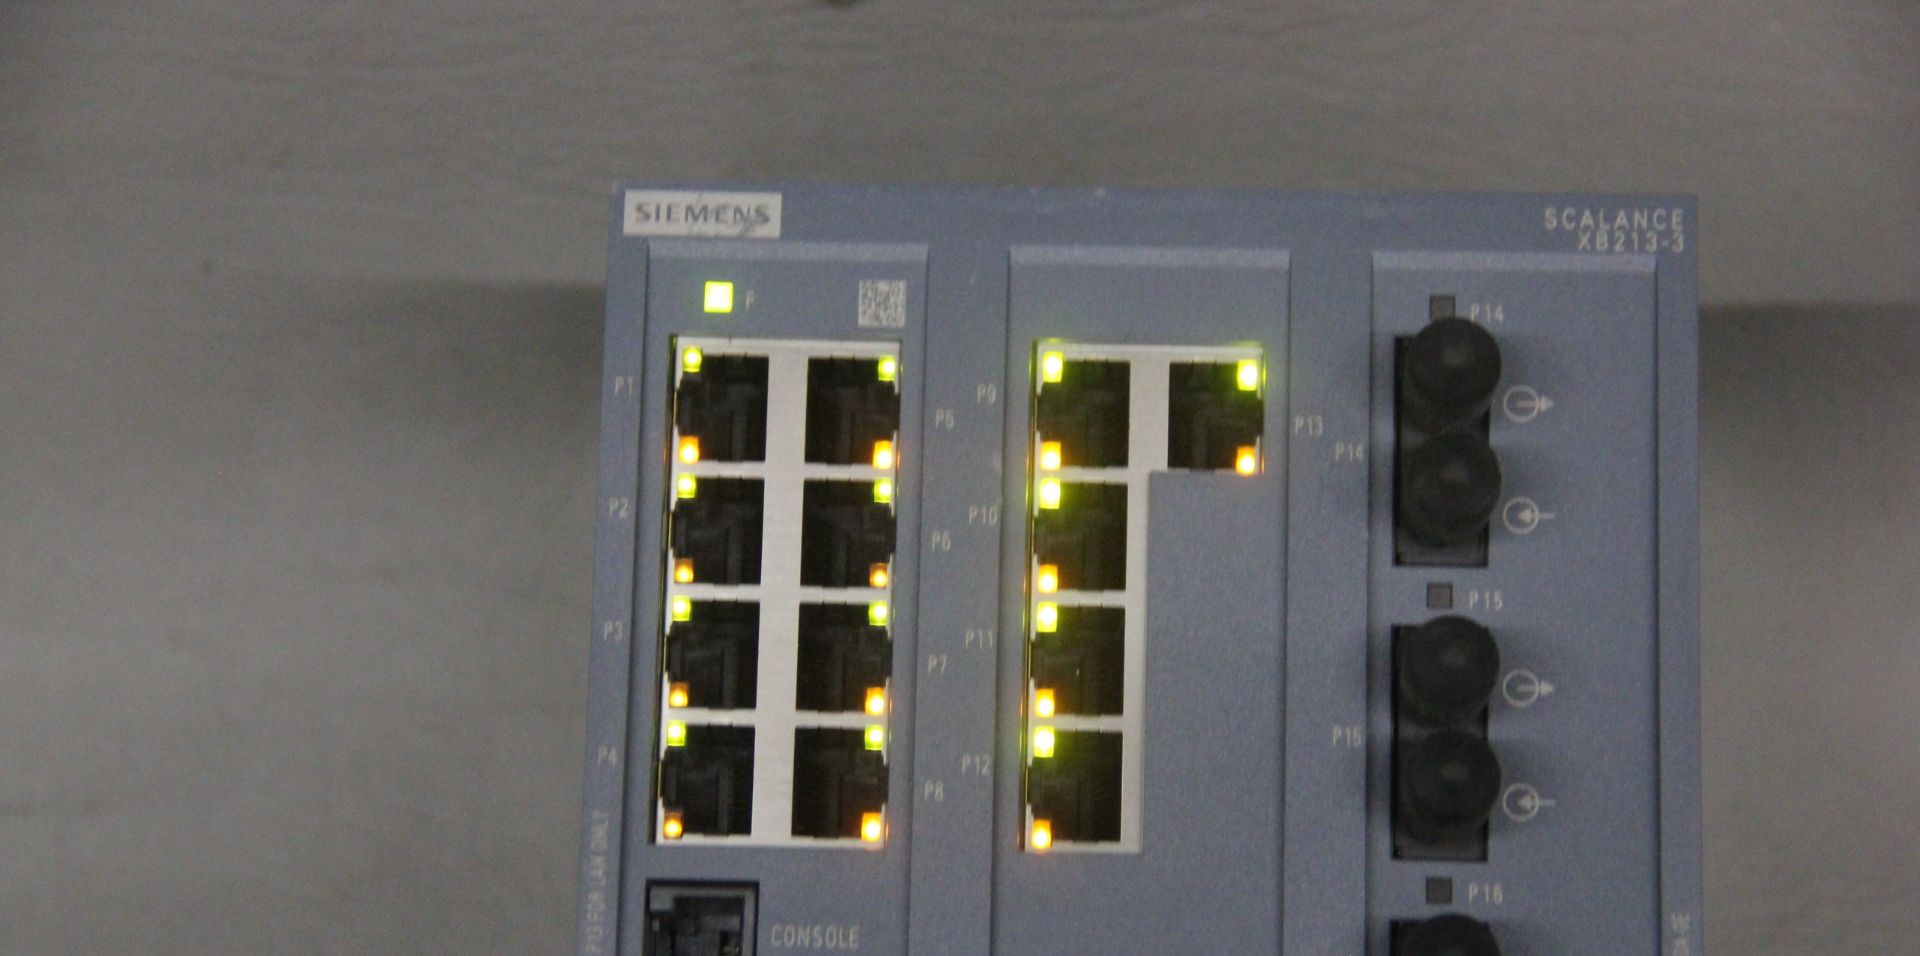 SIEMENS INDUSTRIAL ETHERNET SWITCH - Image 5 of 5